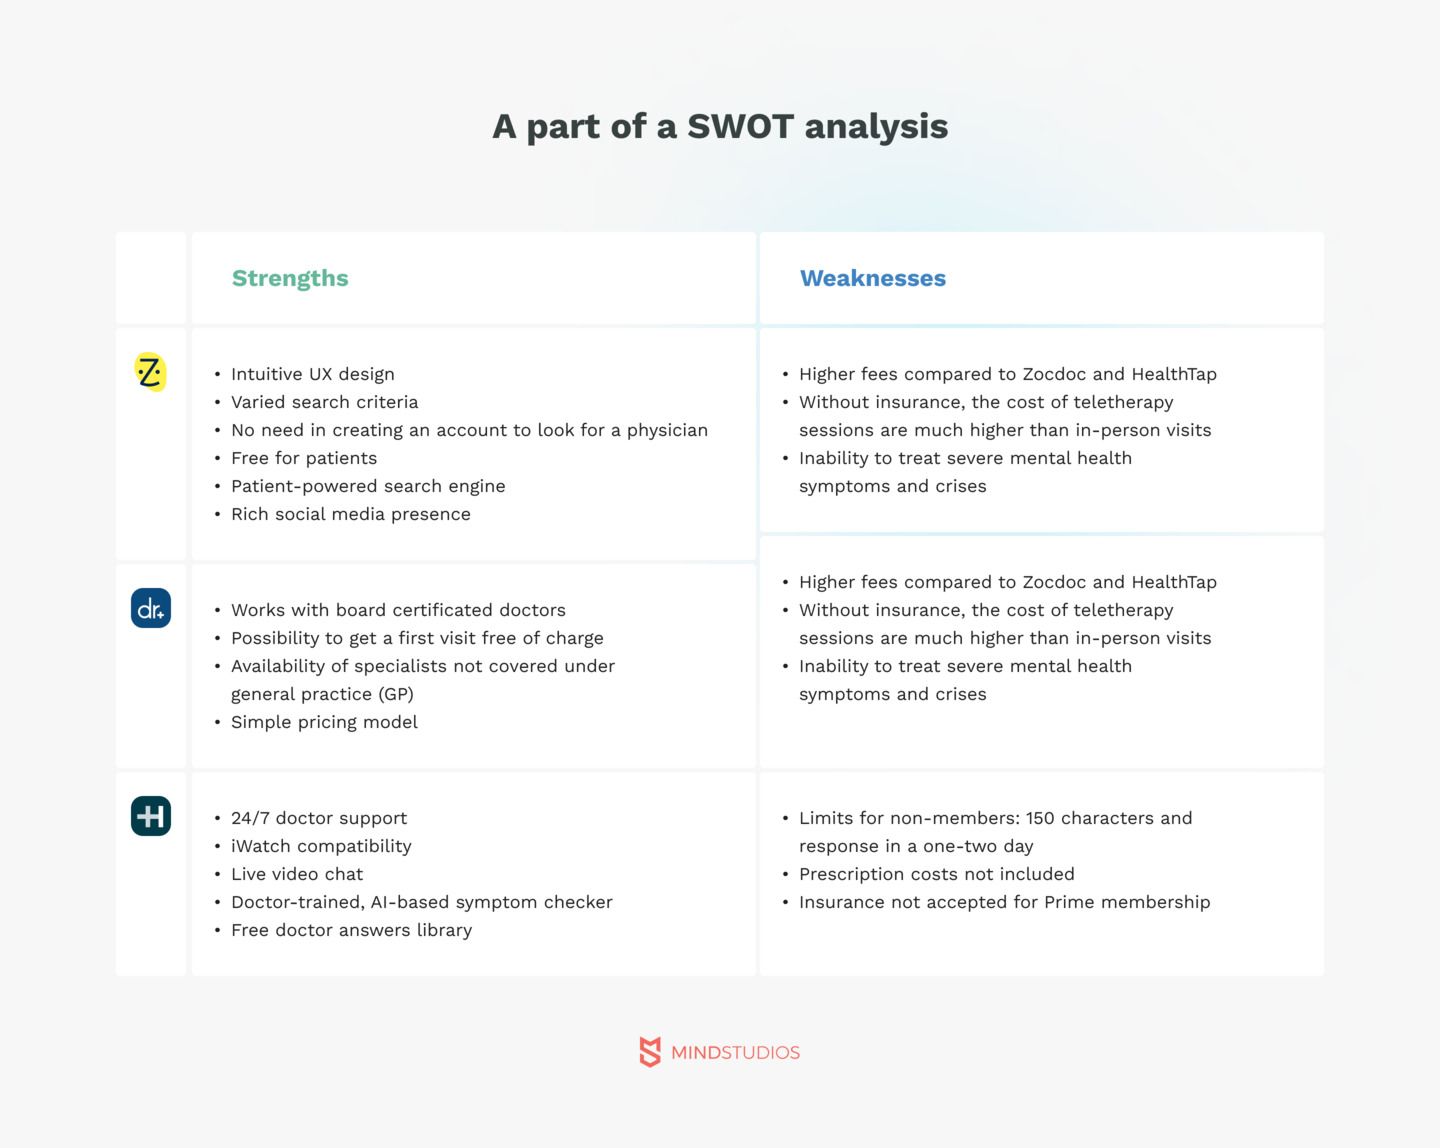 A part of a SWOT analysis